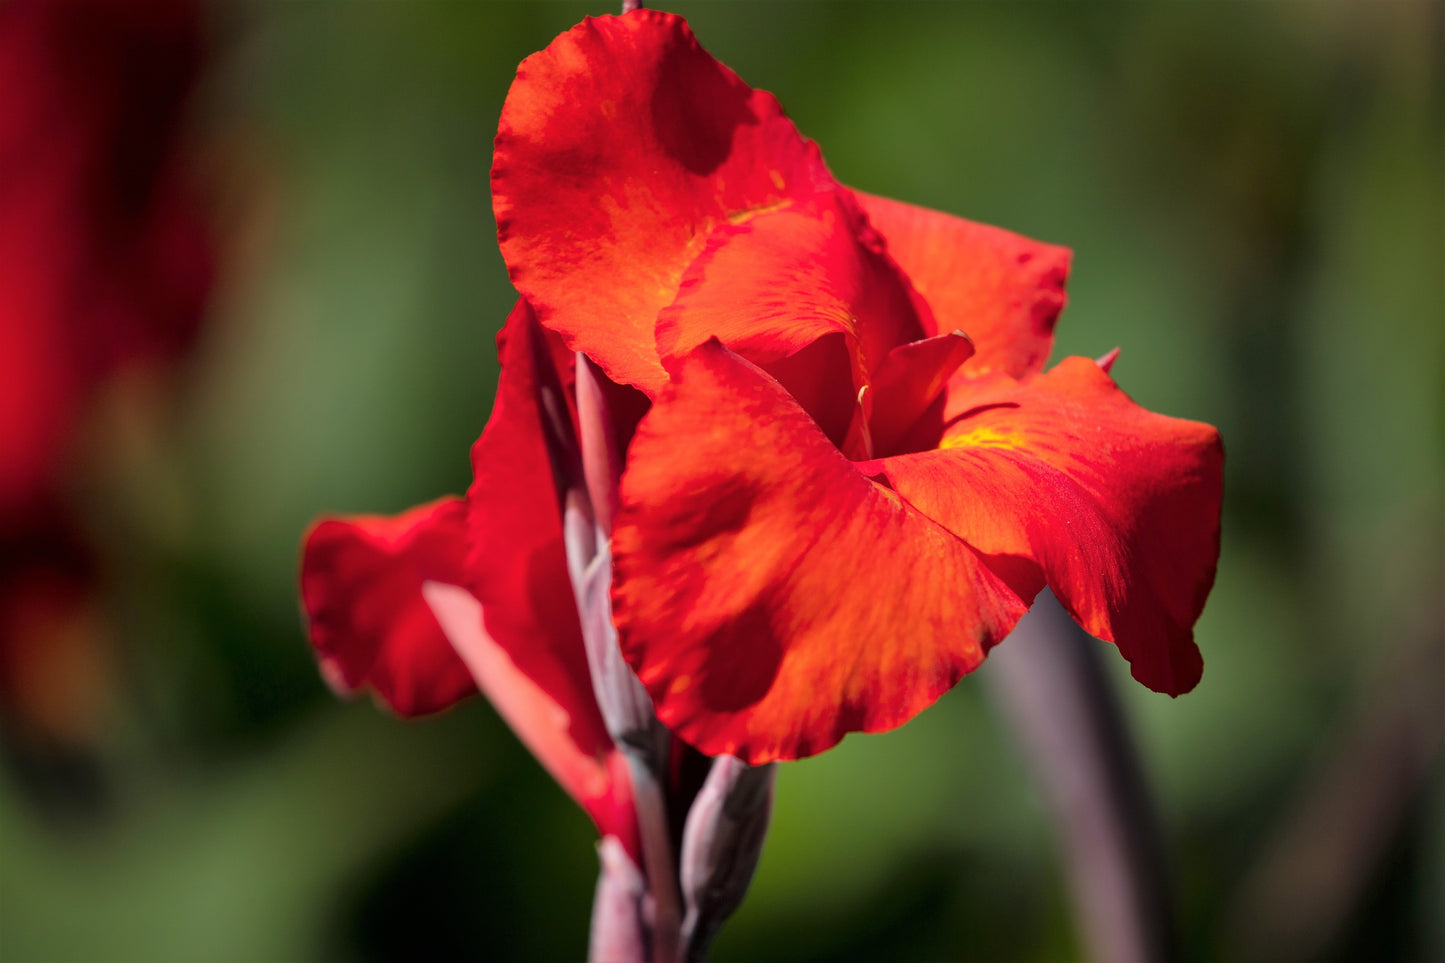 5 RED CANNA LILY Indian Shot Canna Indica Flower Seeds